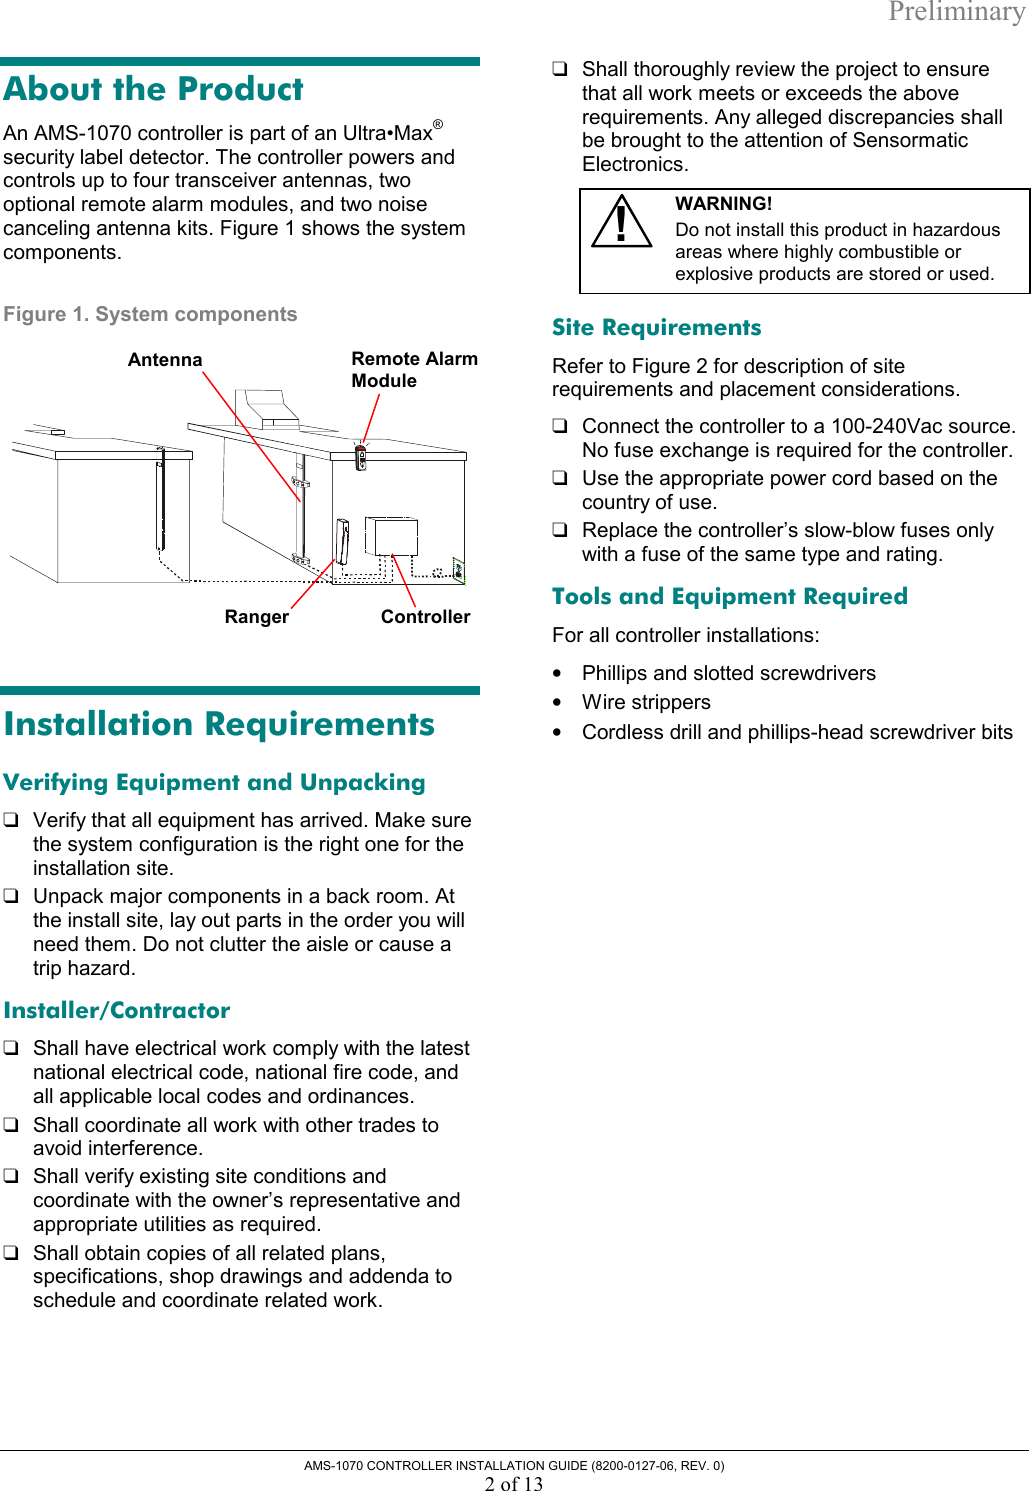 Preliminary AMS-1070 CONTROLLER INSTALLATION GUIDE (8200-0127-06, REV. 0) 2 of 13 About the Product An AMS-1070 controller is part of an Ultra•Max® security label detector. The controller powers and controls up to four transceiver antennas, two optional remote alarm modules, and two noise canceling antenna kits. Figure 1 shows the system components. Figure 1. System components   Installation Requirements Verifying Equipment and Unpacking ❑  Verify that all equipment has arrived. Make sure the system configuration is the right one for the installation site. ❑  Unpack major components in a back room. At the install site, lay out parts in the order you will need them. Do not clutter the aisle or cause a trip hazard. Installer/Contractor ❑  Shall have electrical work comply with the latest national electrical code, national fire code, and all applicable local codes and ordinances. ❑  Shall coordinate all work with other trades to avoid interference. ❑  Shall verify existing site conditions and coordinate with the owner’s representative and appropriate utilities as required. ❑  Shall obtain copies of all related plans, specifications, shop drawings and addenda to schedule and coordinate related work. ❑  Shall thoroughly review the project to ensure that all work meets or exceeds the above requirements. Any alleged discrepancies shall be brought to the attention of Sensormatic Electronics.  !WARNING!  Do not install this product in hazardous areas where highly combustible or explosive products are stored or used.  Site Requirements Refer to Figure 2 for description of site requirements and placement considerations. ❑  Connect the controller to a 100-240Vac source. No fuse exchange is required for the controller.  ❑  Use the appropriate power cord based on the country of use. ❑  Replace the controller’s slow-blow fuses only with a fuse of the same type and rating. Tools and Equipment Required For all controller installations: •  Phillips and slotted screwdrivers •  Wire strippers •  Cordless drill and phillips-head screwdriver bits  Ranger Remote Alarm ModuleController Antenna 